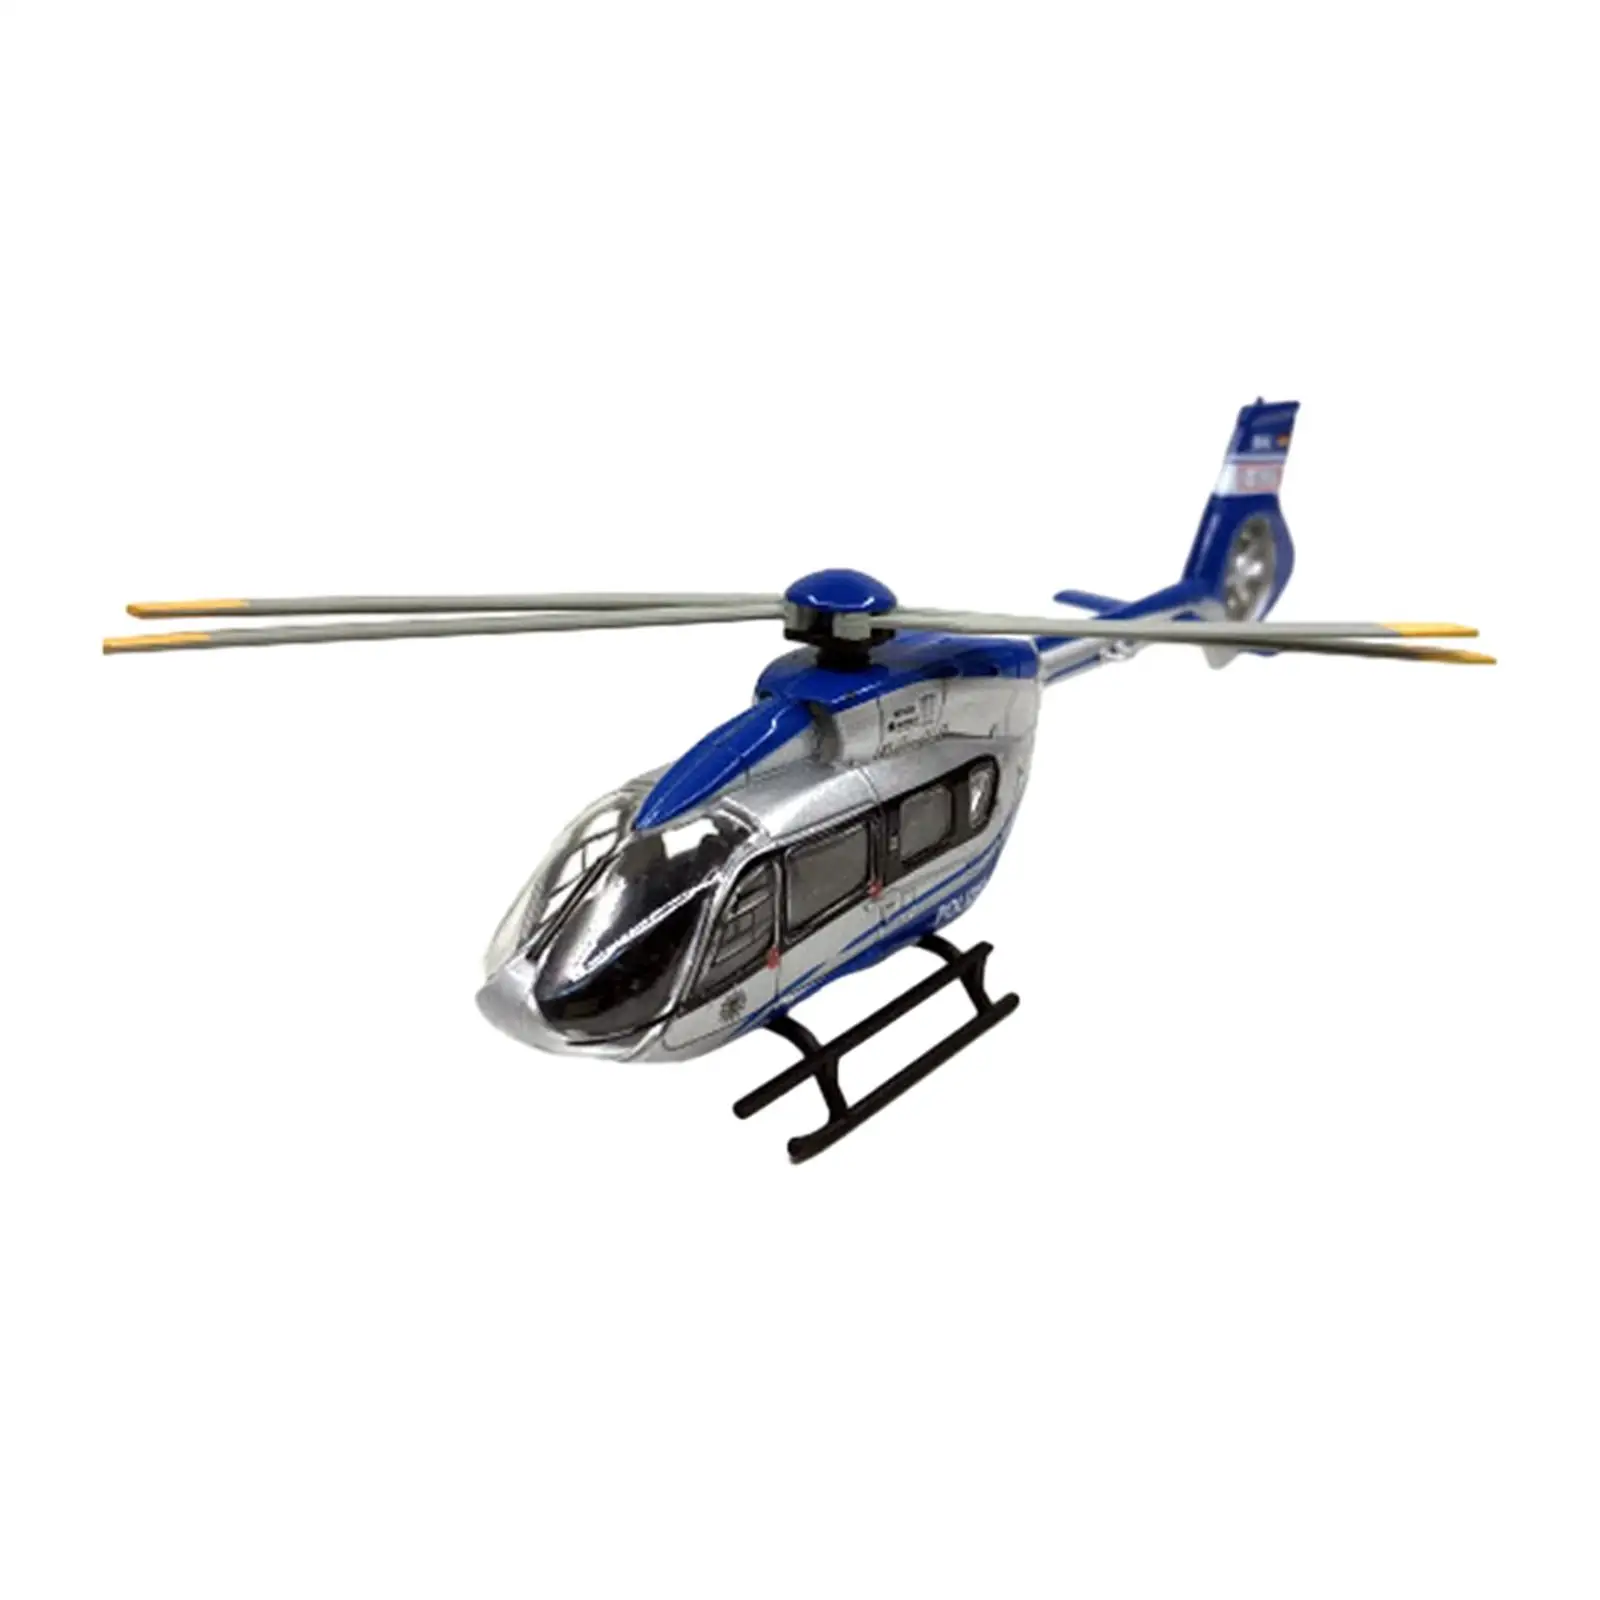 

1/87 Airbus H145 Helicopter Office Cafe Diecast Plane Model Miniature Aircraft for Friends Children Teens Adults Birthday Gifts